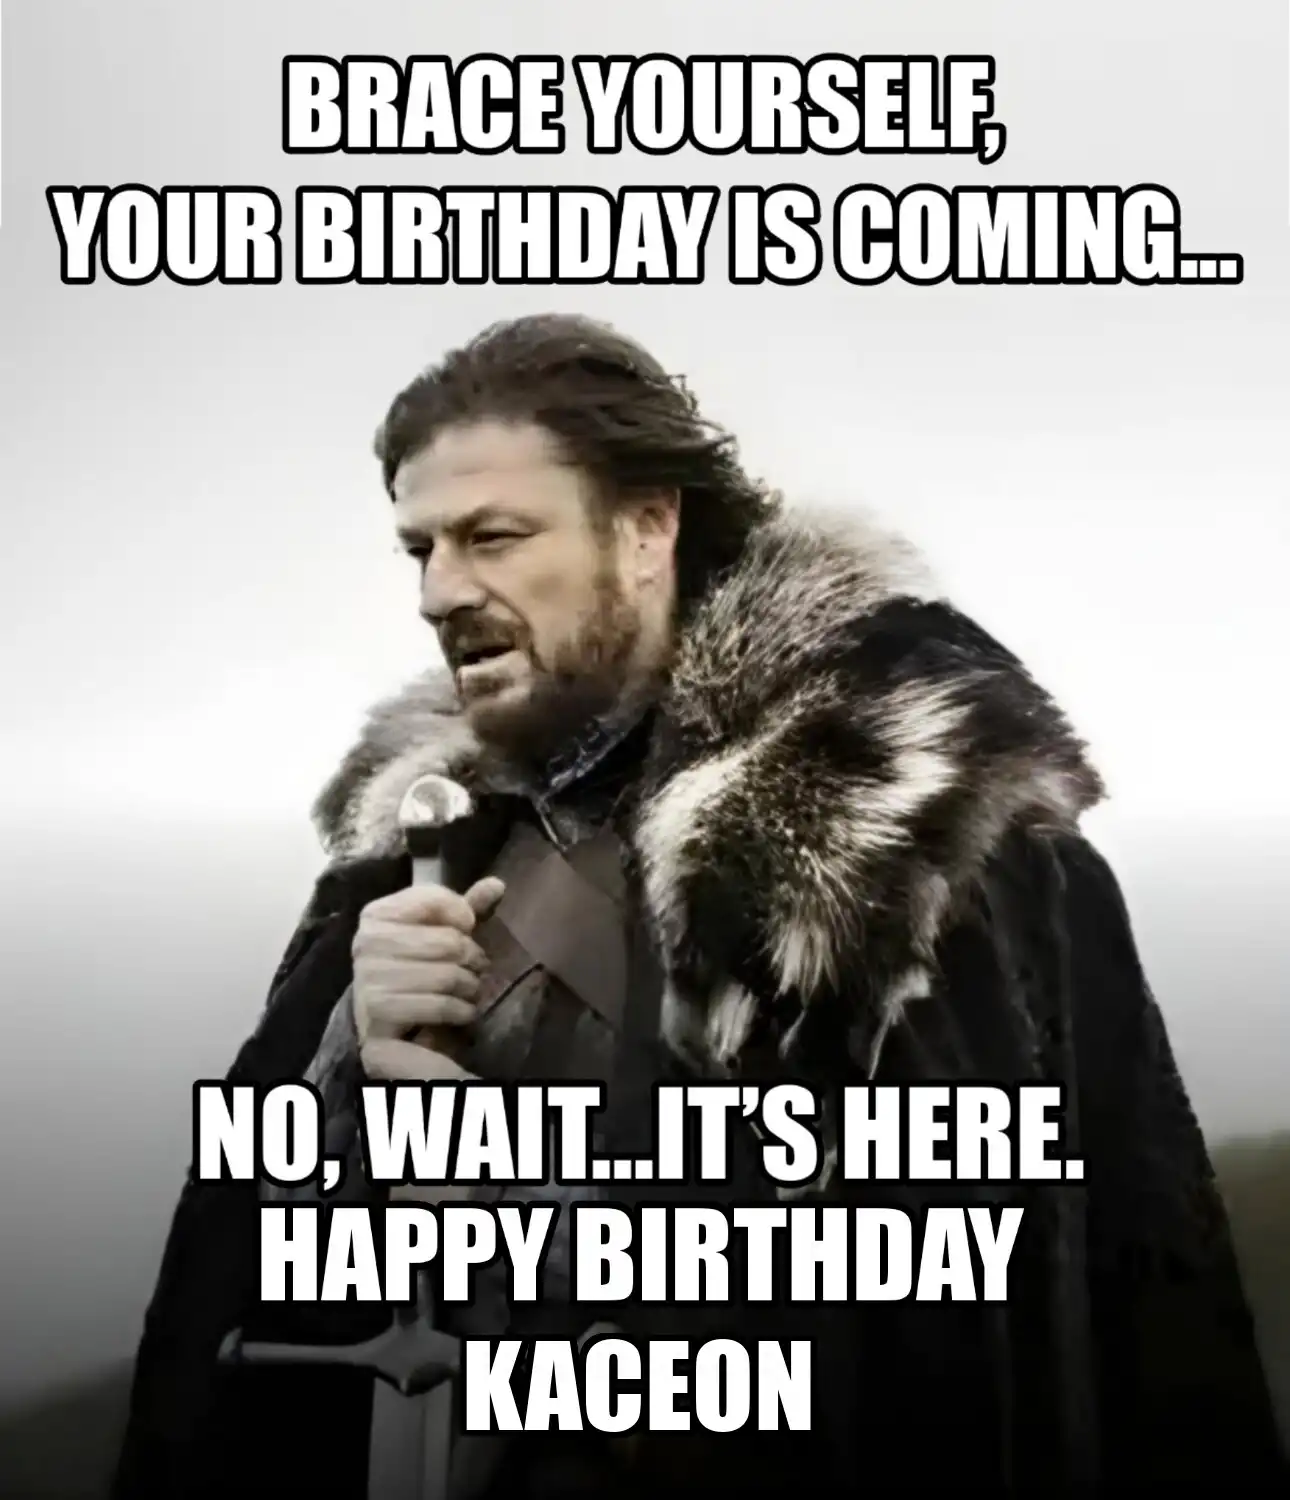 Happy Birthday Kaceon Brace Yourself Your Birthday Is Coming Meme